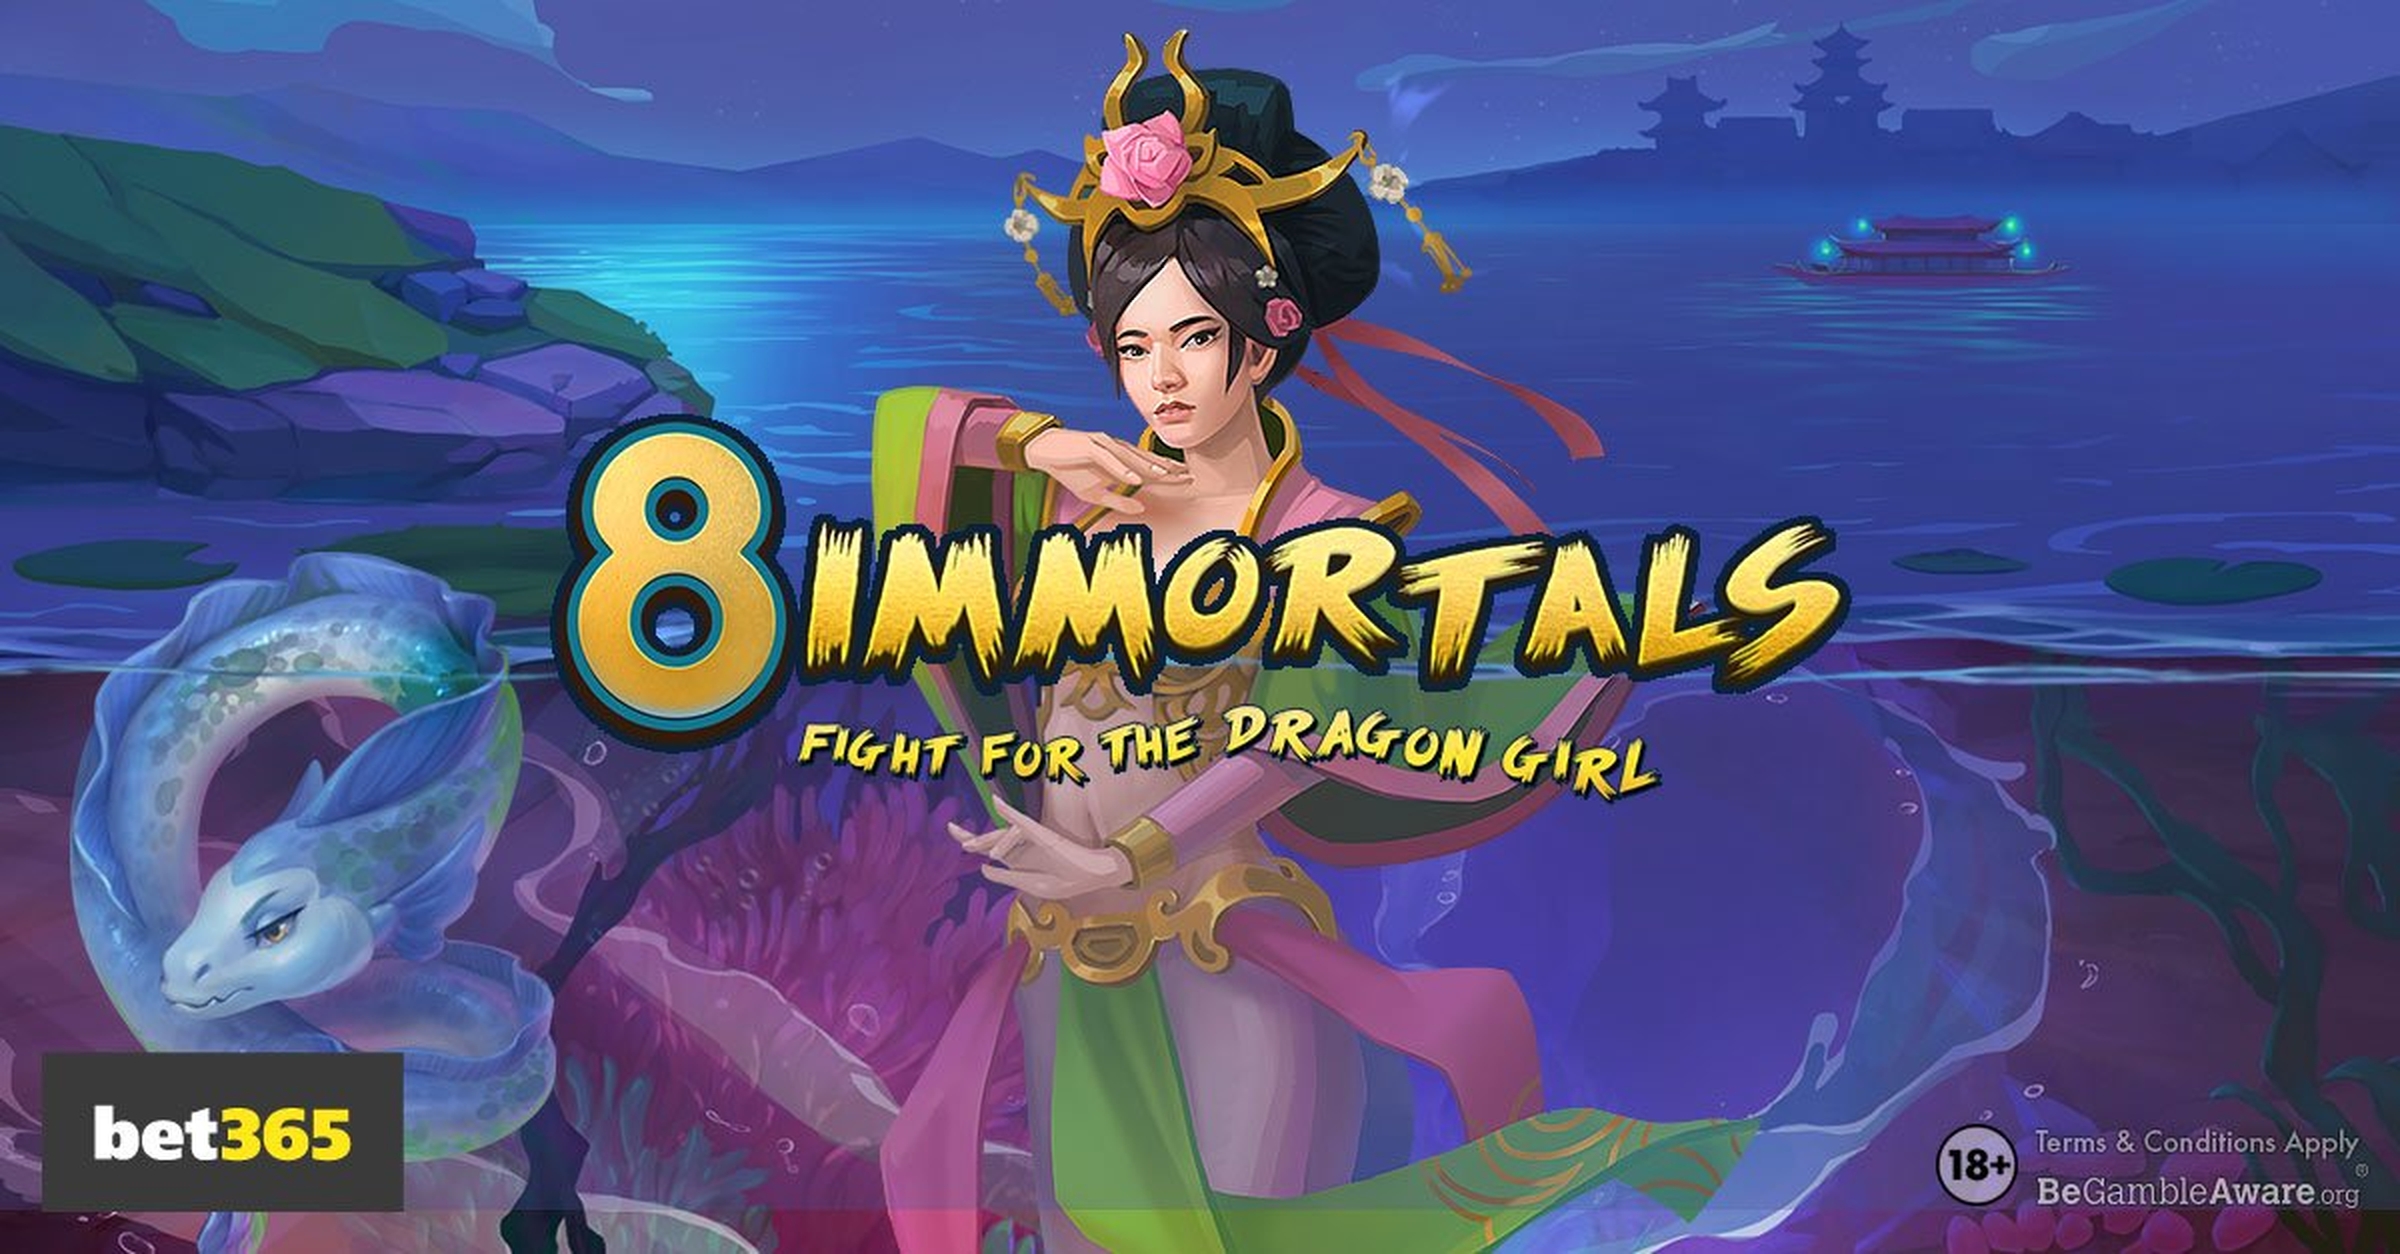 The 8 Immortals Online Slot Demo Game by bet365 Software